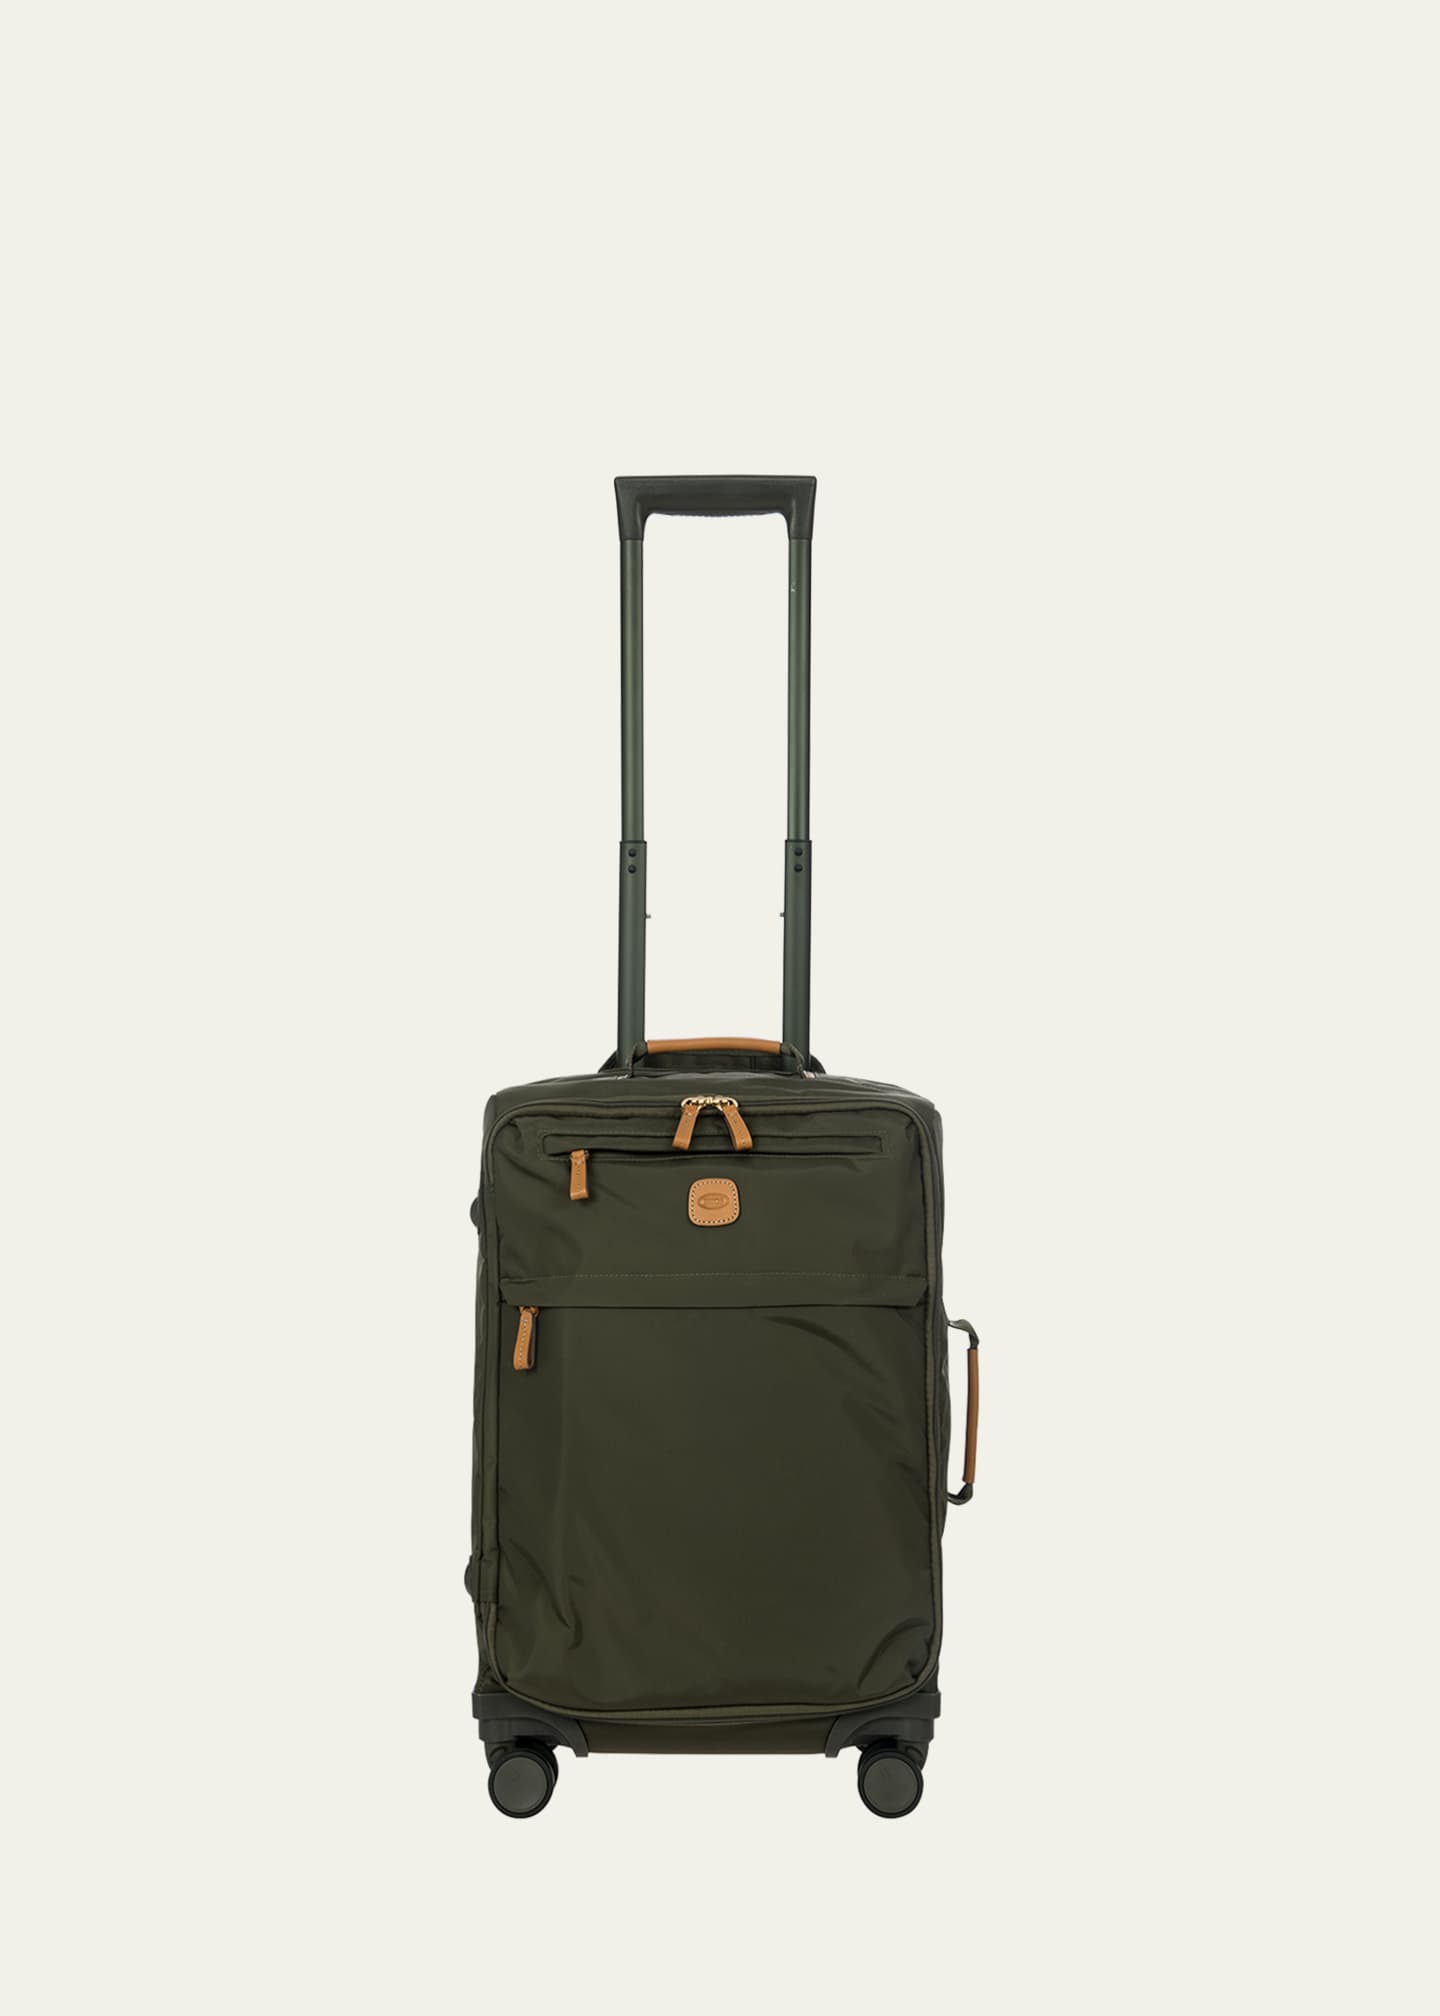 Bric's X-Travel 21" Carry-On Spinner Luggage Image 1 of 5